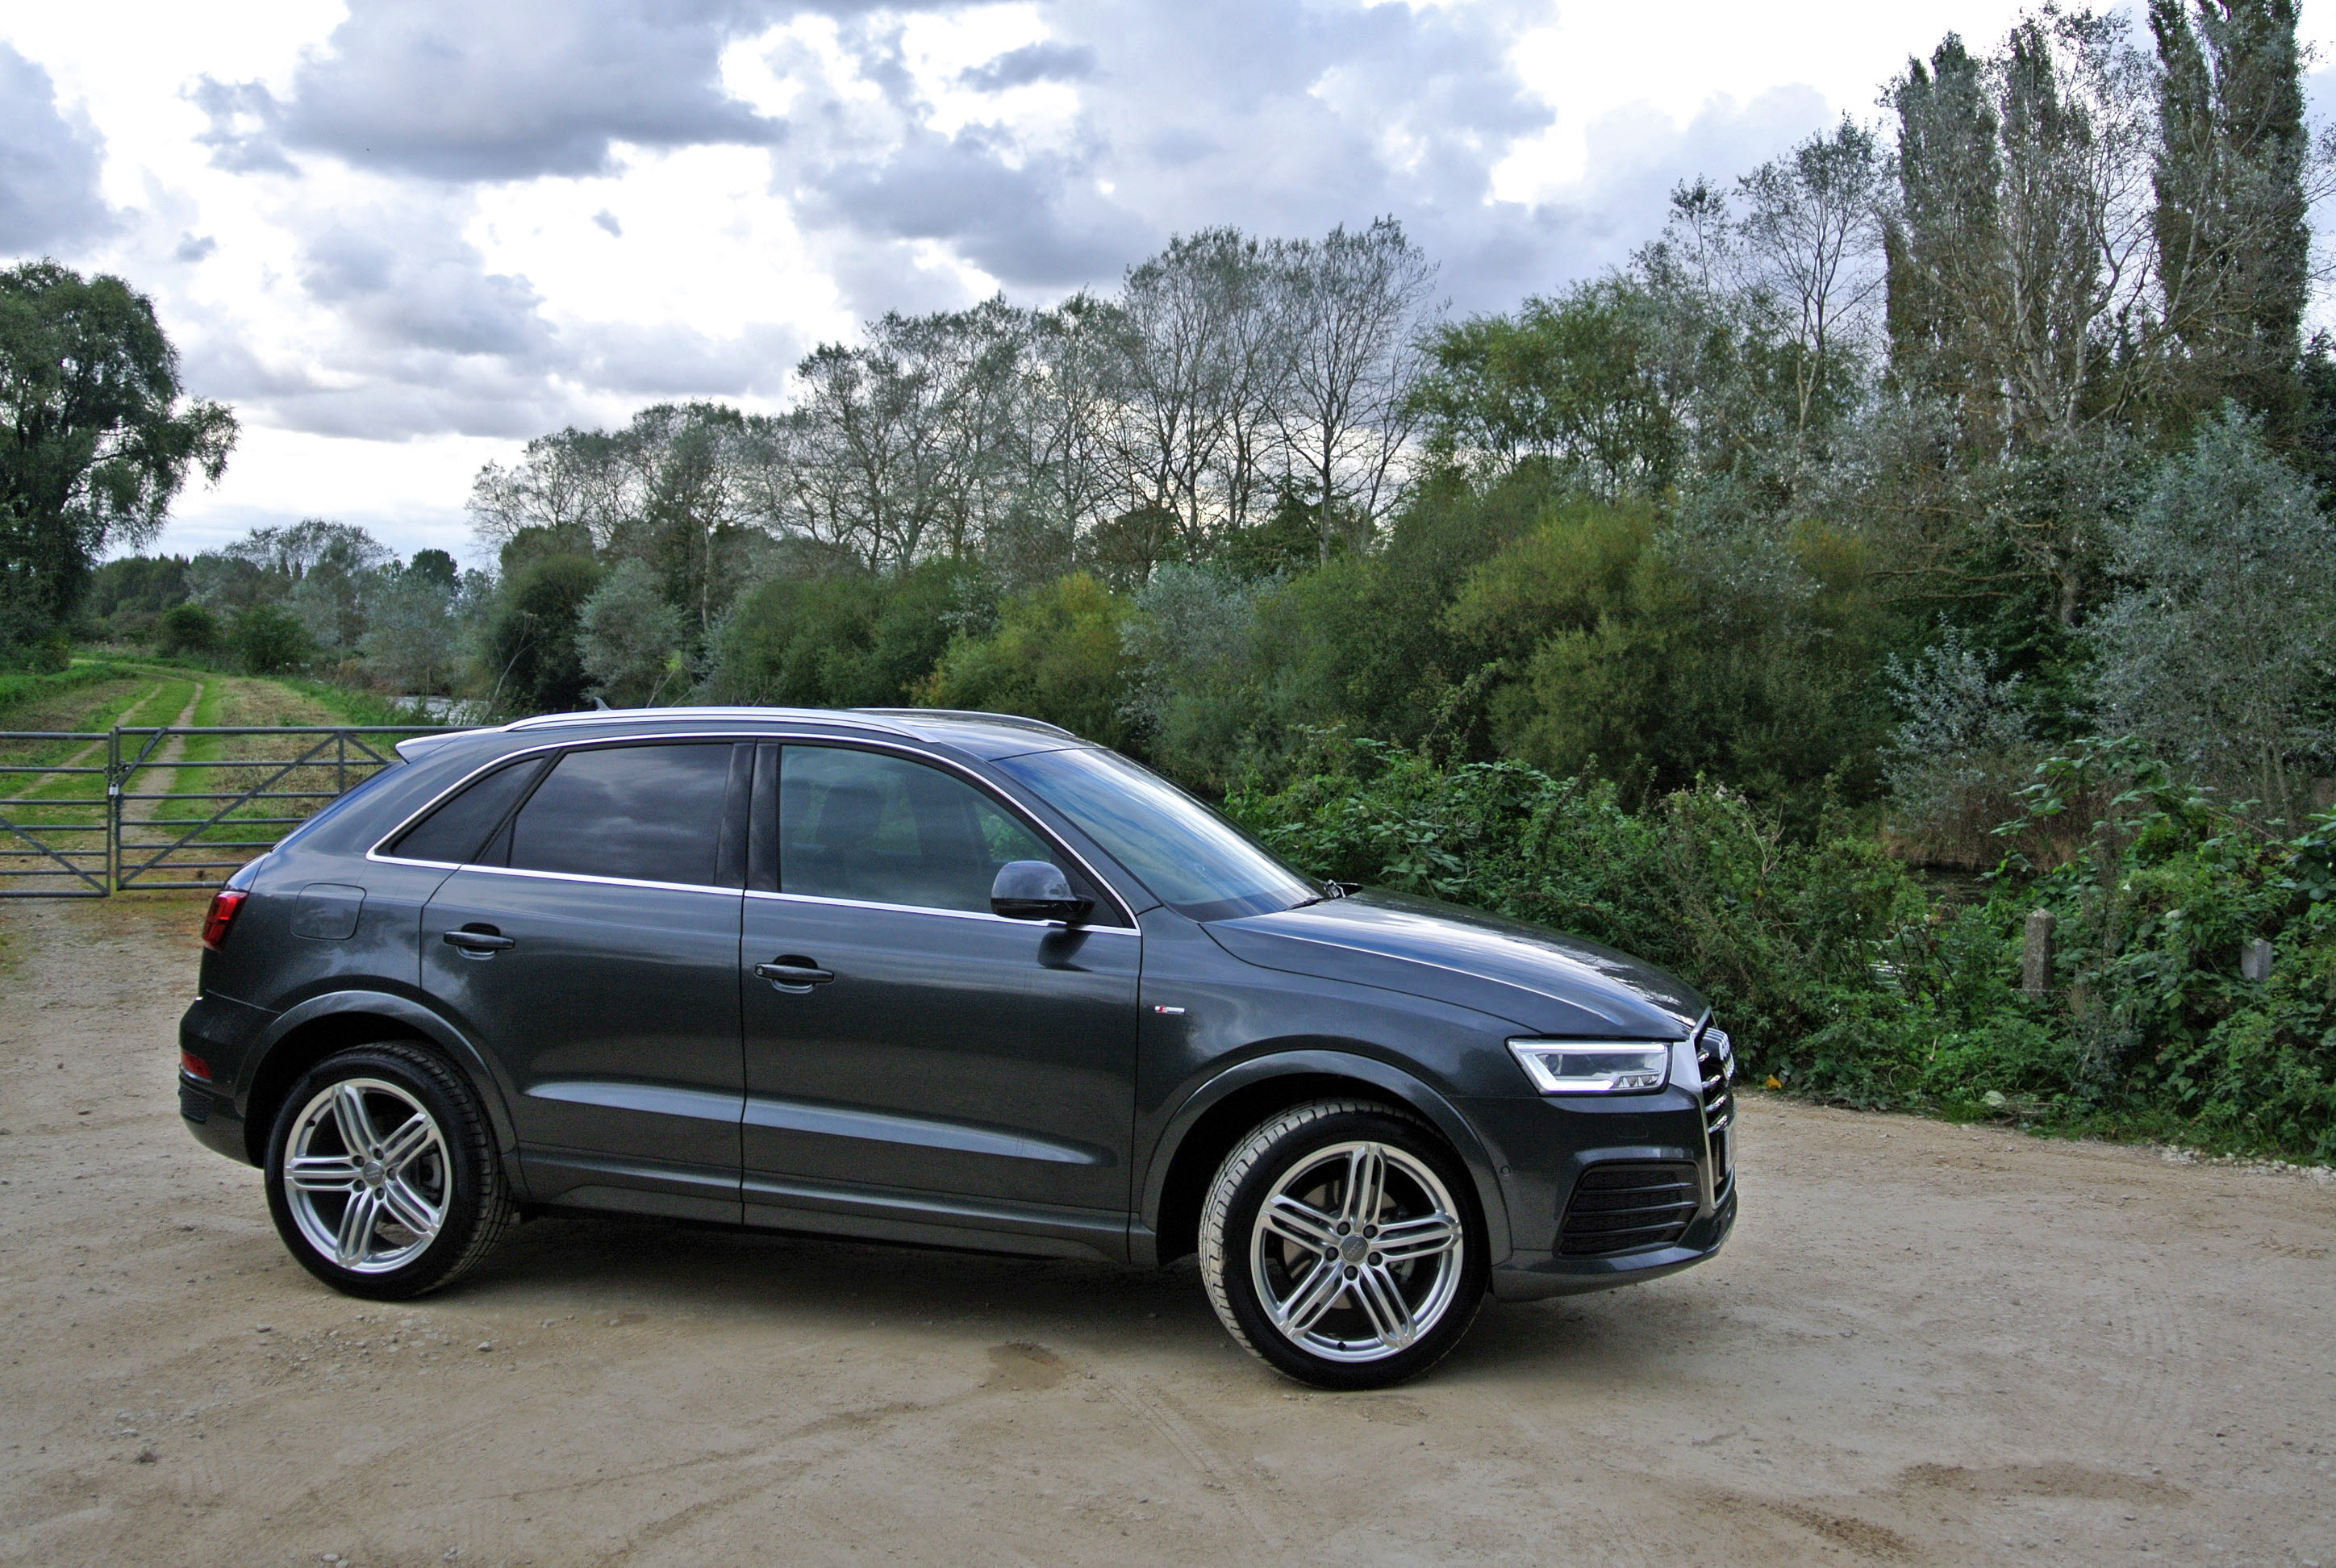 Classy Audi Q3 knows how to monster its options’ fees